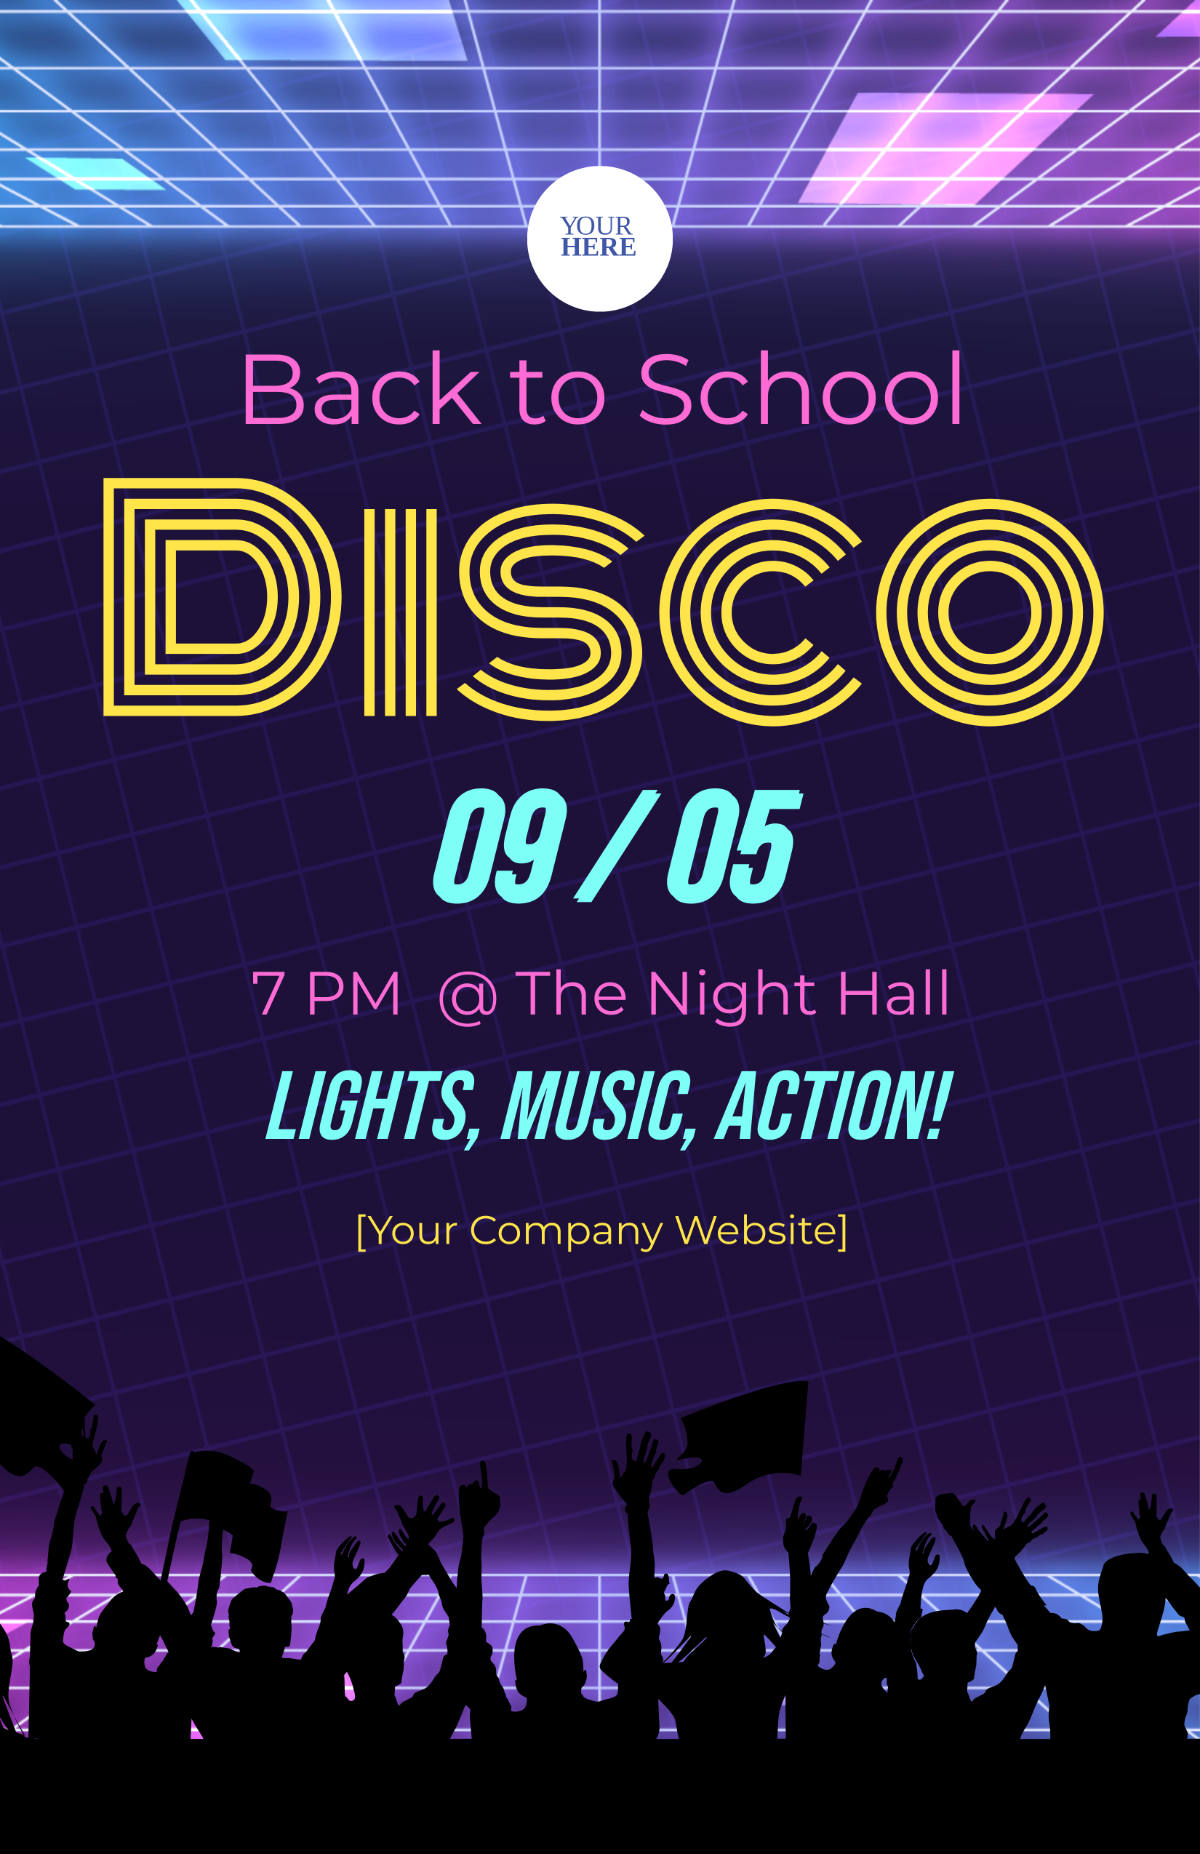 Back to School Disco Poster